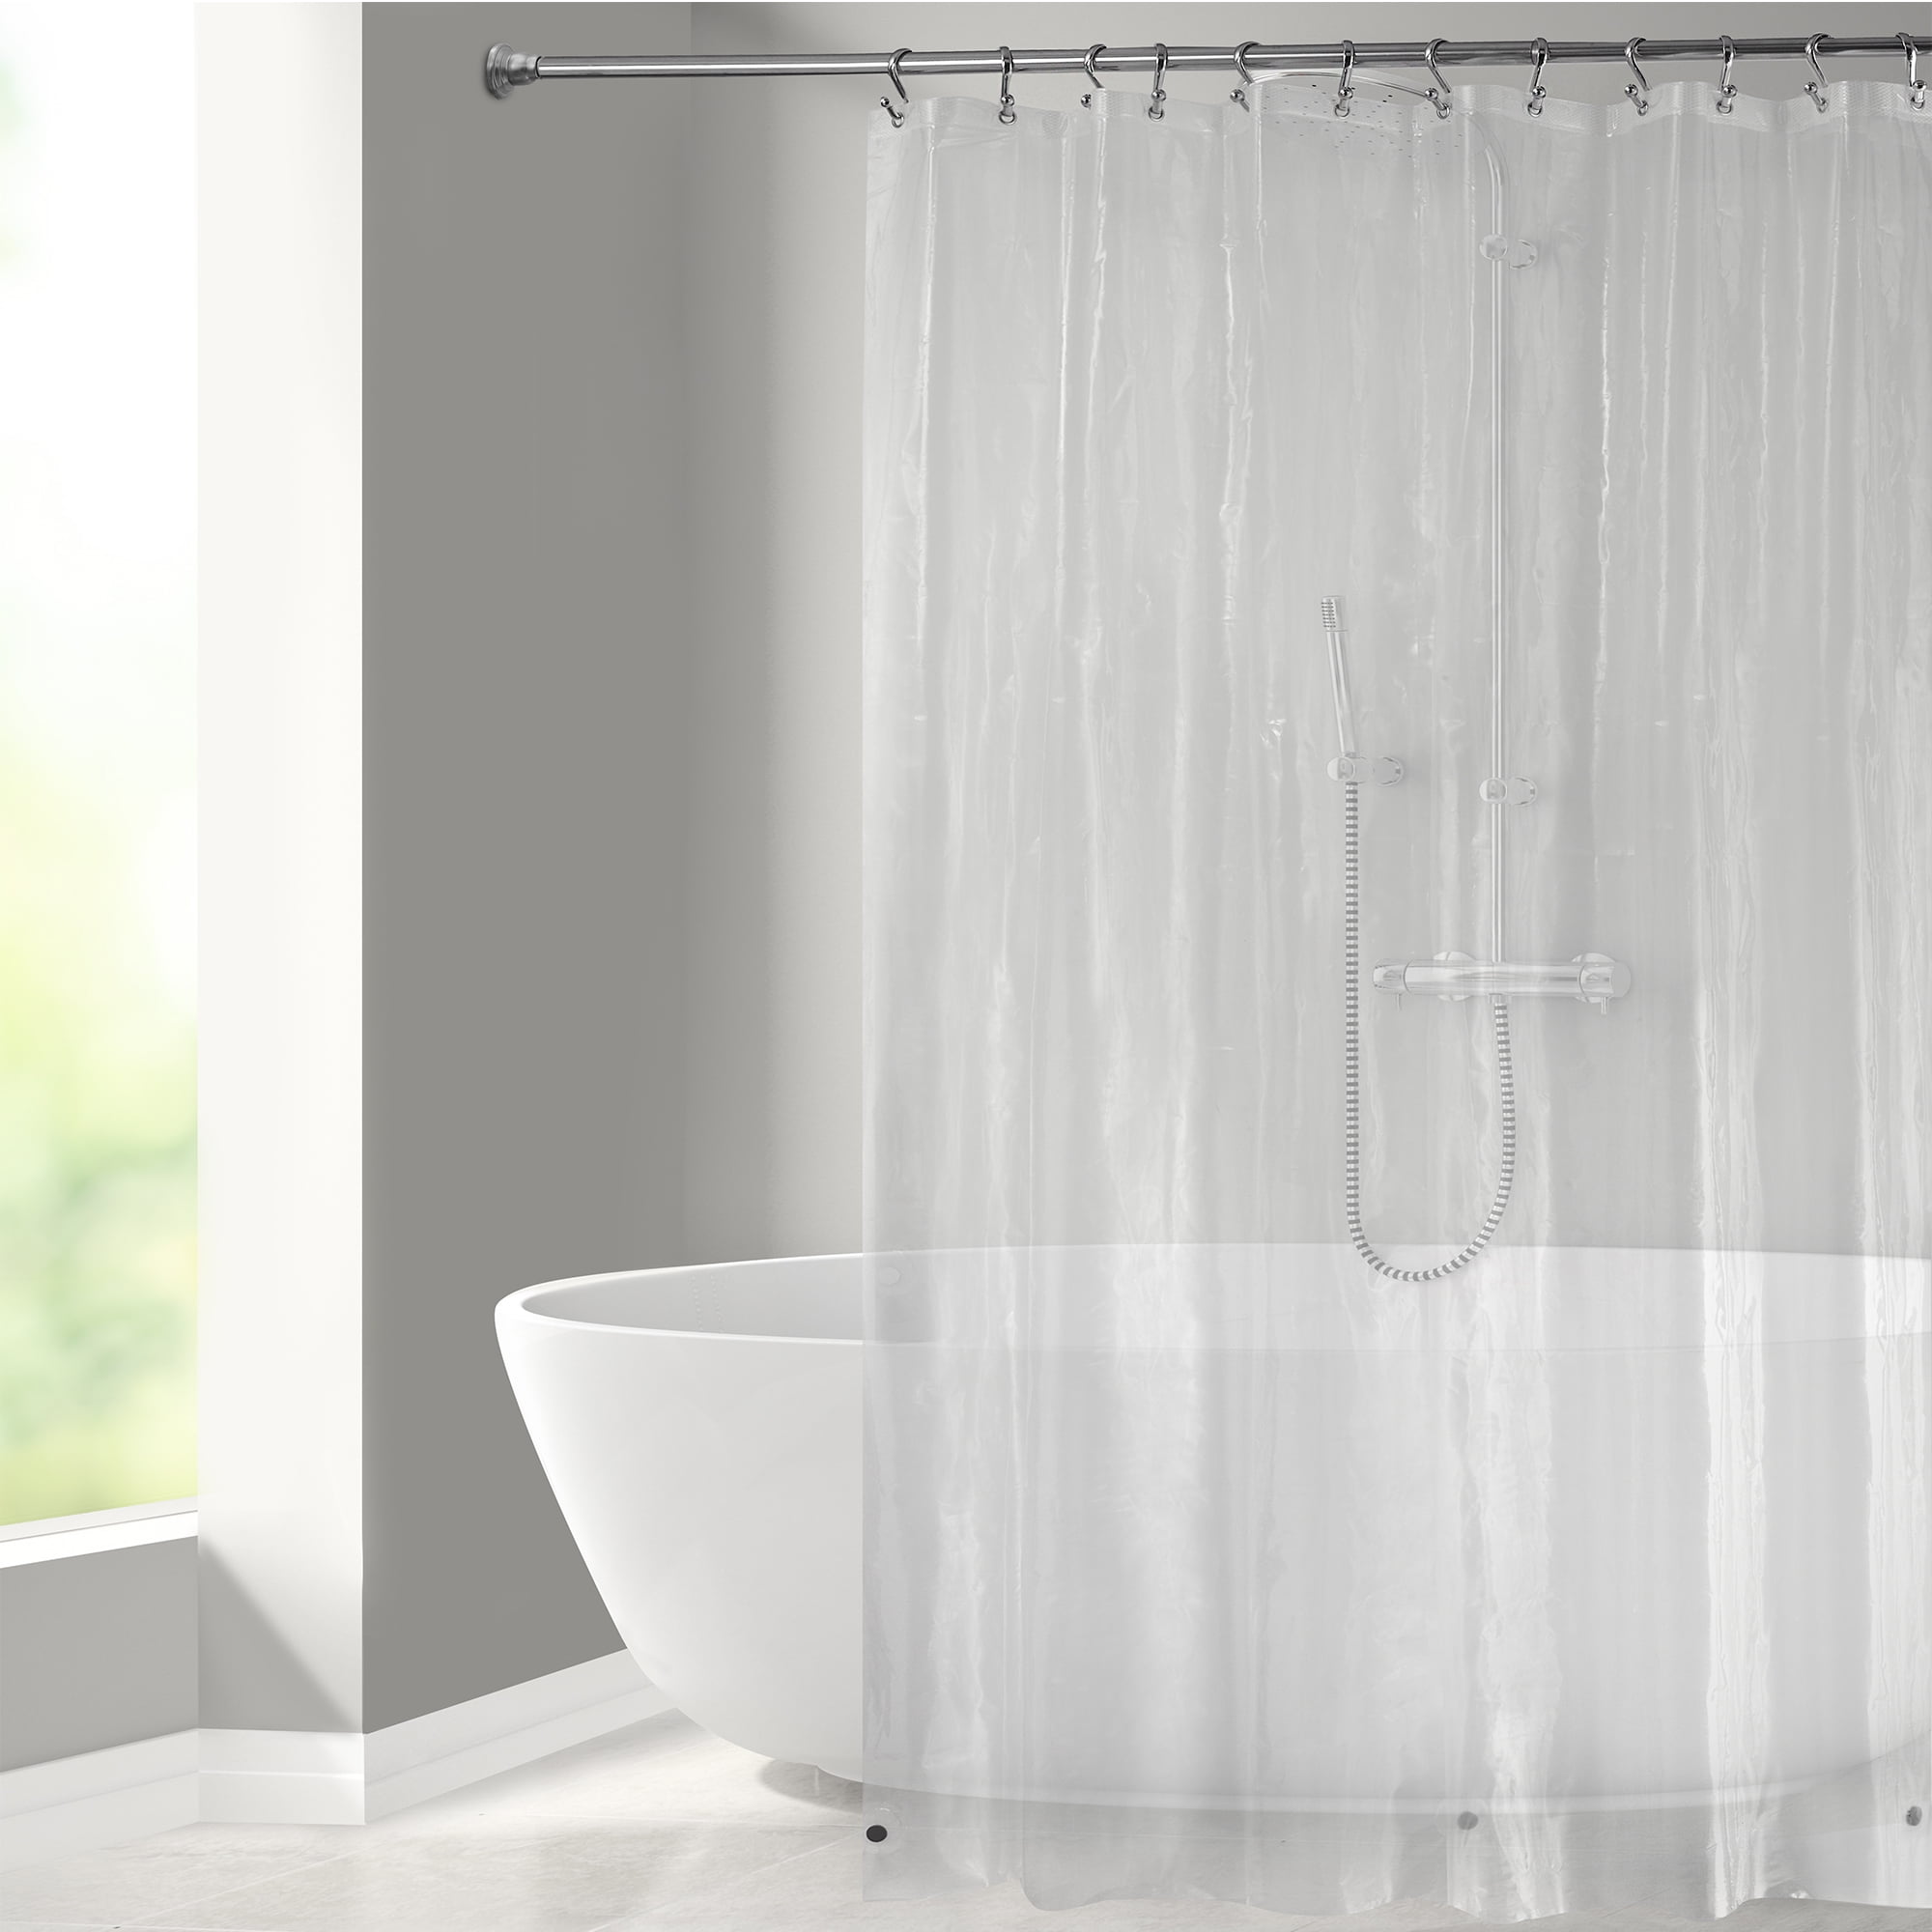 Clear peva shower Curtain/liner,ECO-FRIENDLY W/Magnetic Weighted Bottom 70"X72" 